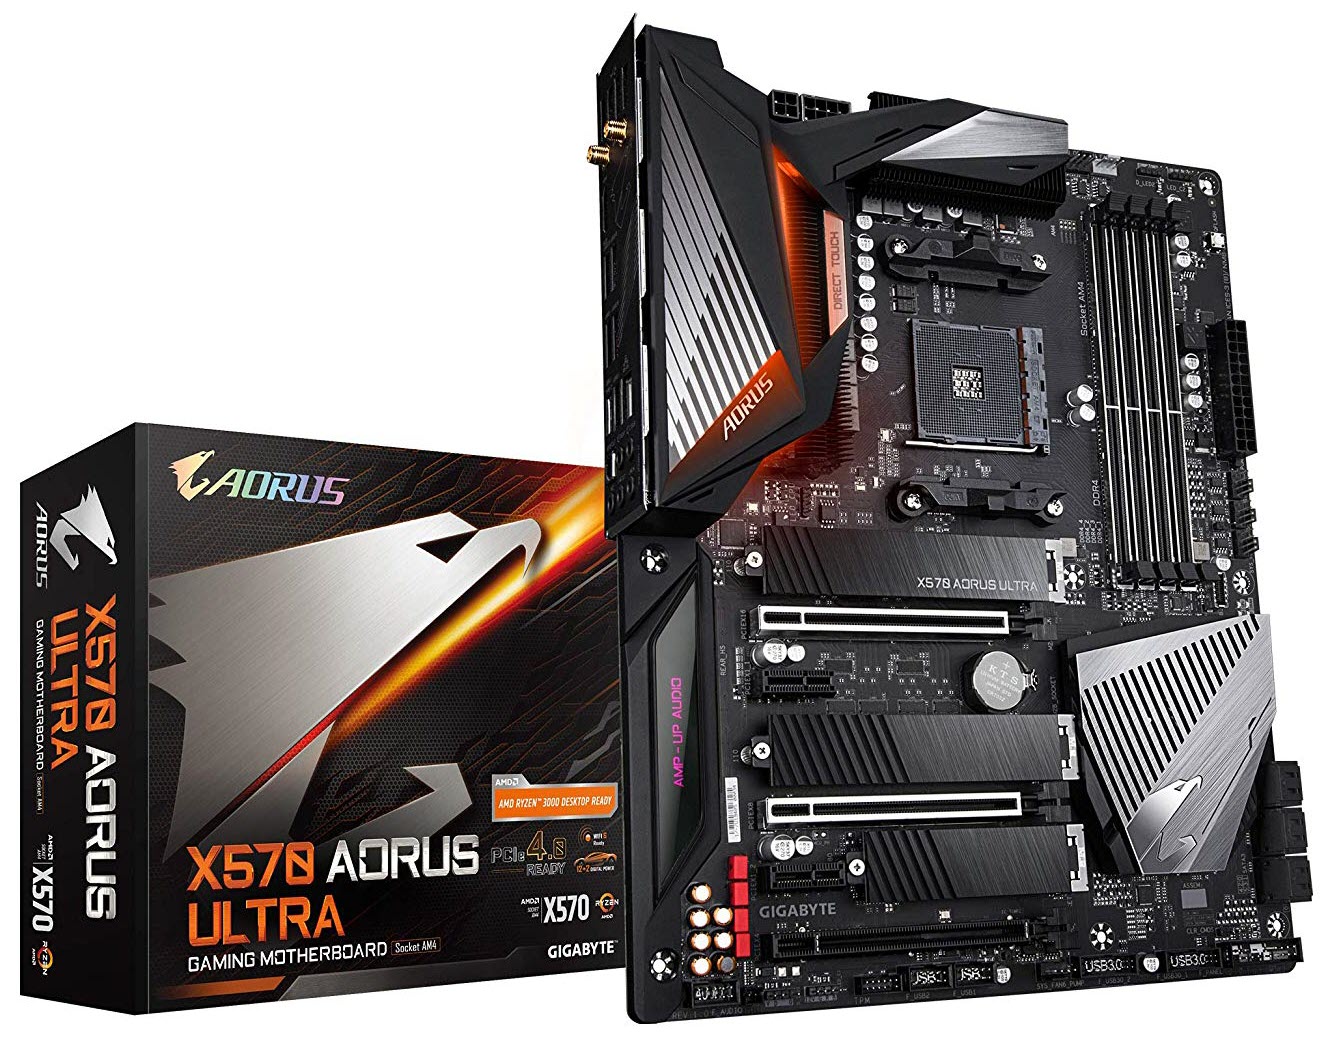 Best Mid-Priced X570 Motherboard: Gigabyte X570 Aorus Ultra